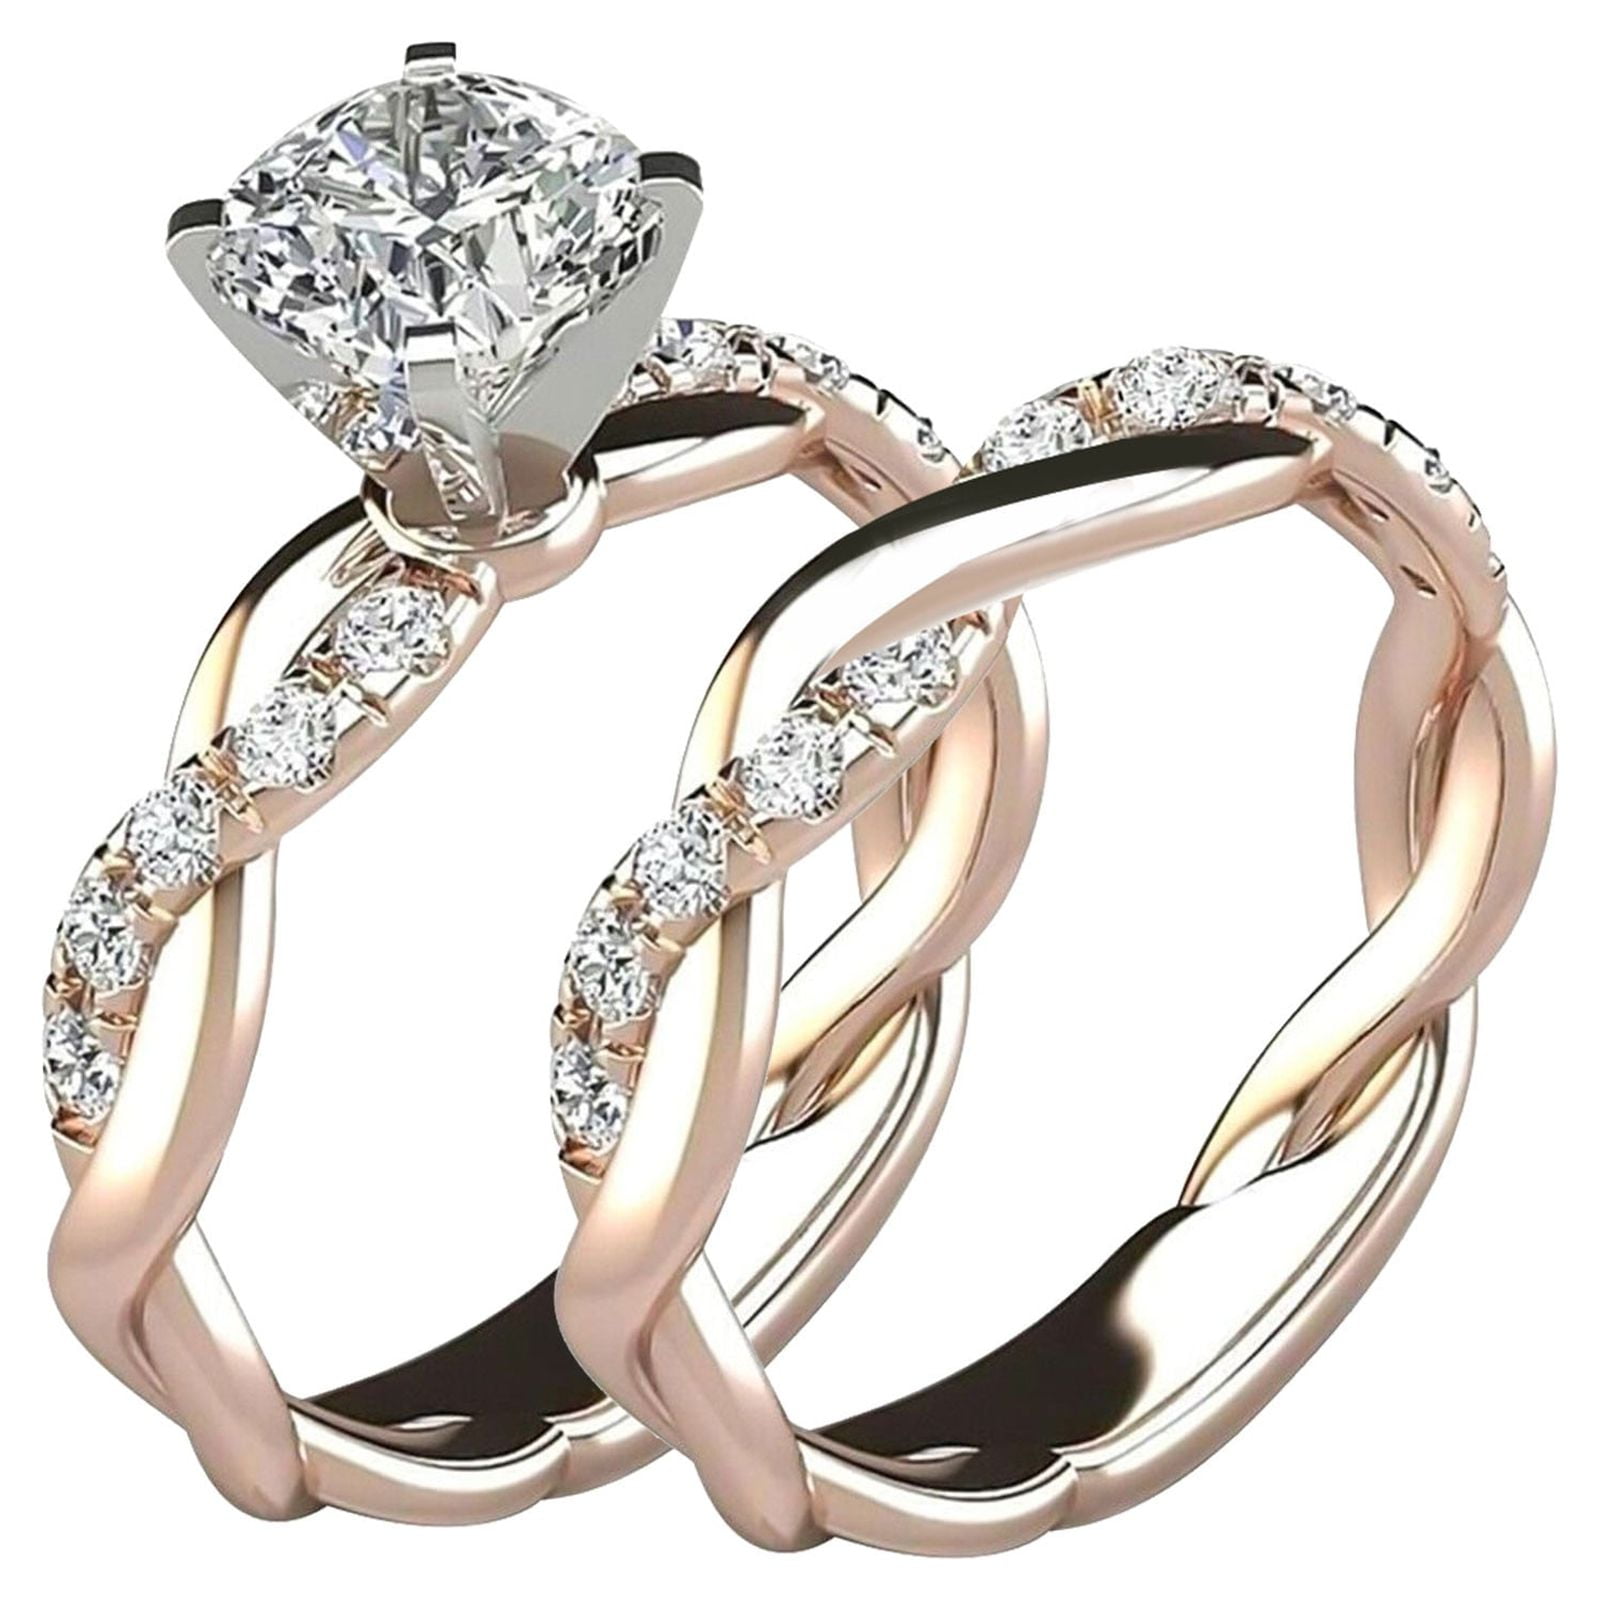 Deals！Loyerfyivos Wedding Bands Engagement Rings for Women, 14K Rose Gold  Cubic Zirconia Promise Rings for Her, Infinity Anniversary 1.5ct Simulated Diamond  Ring Set Size 5 - 10 Discount ! 